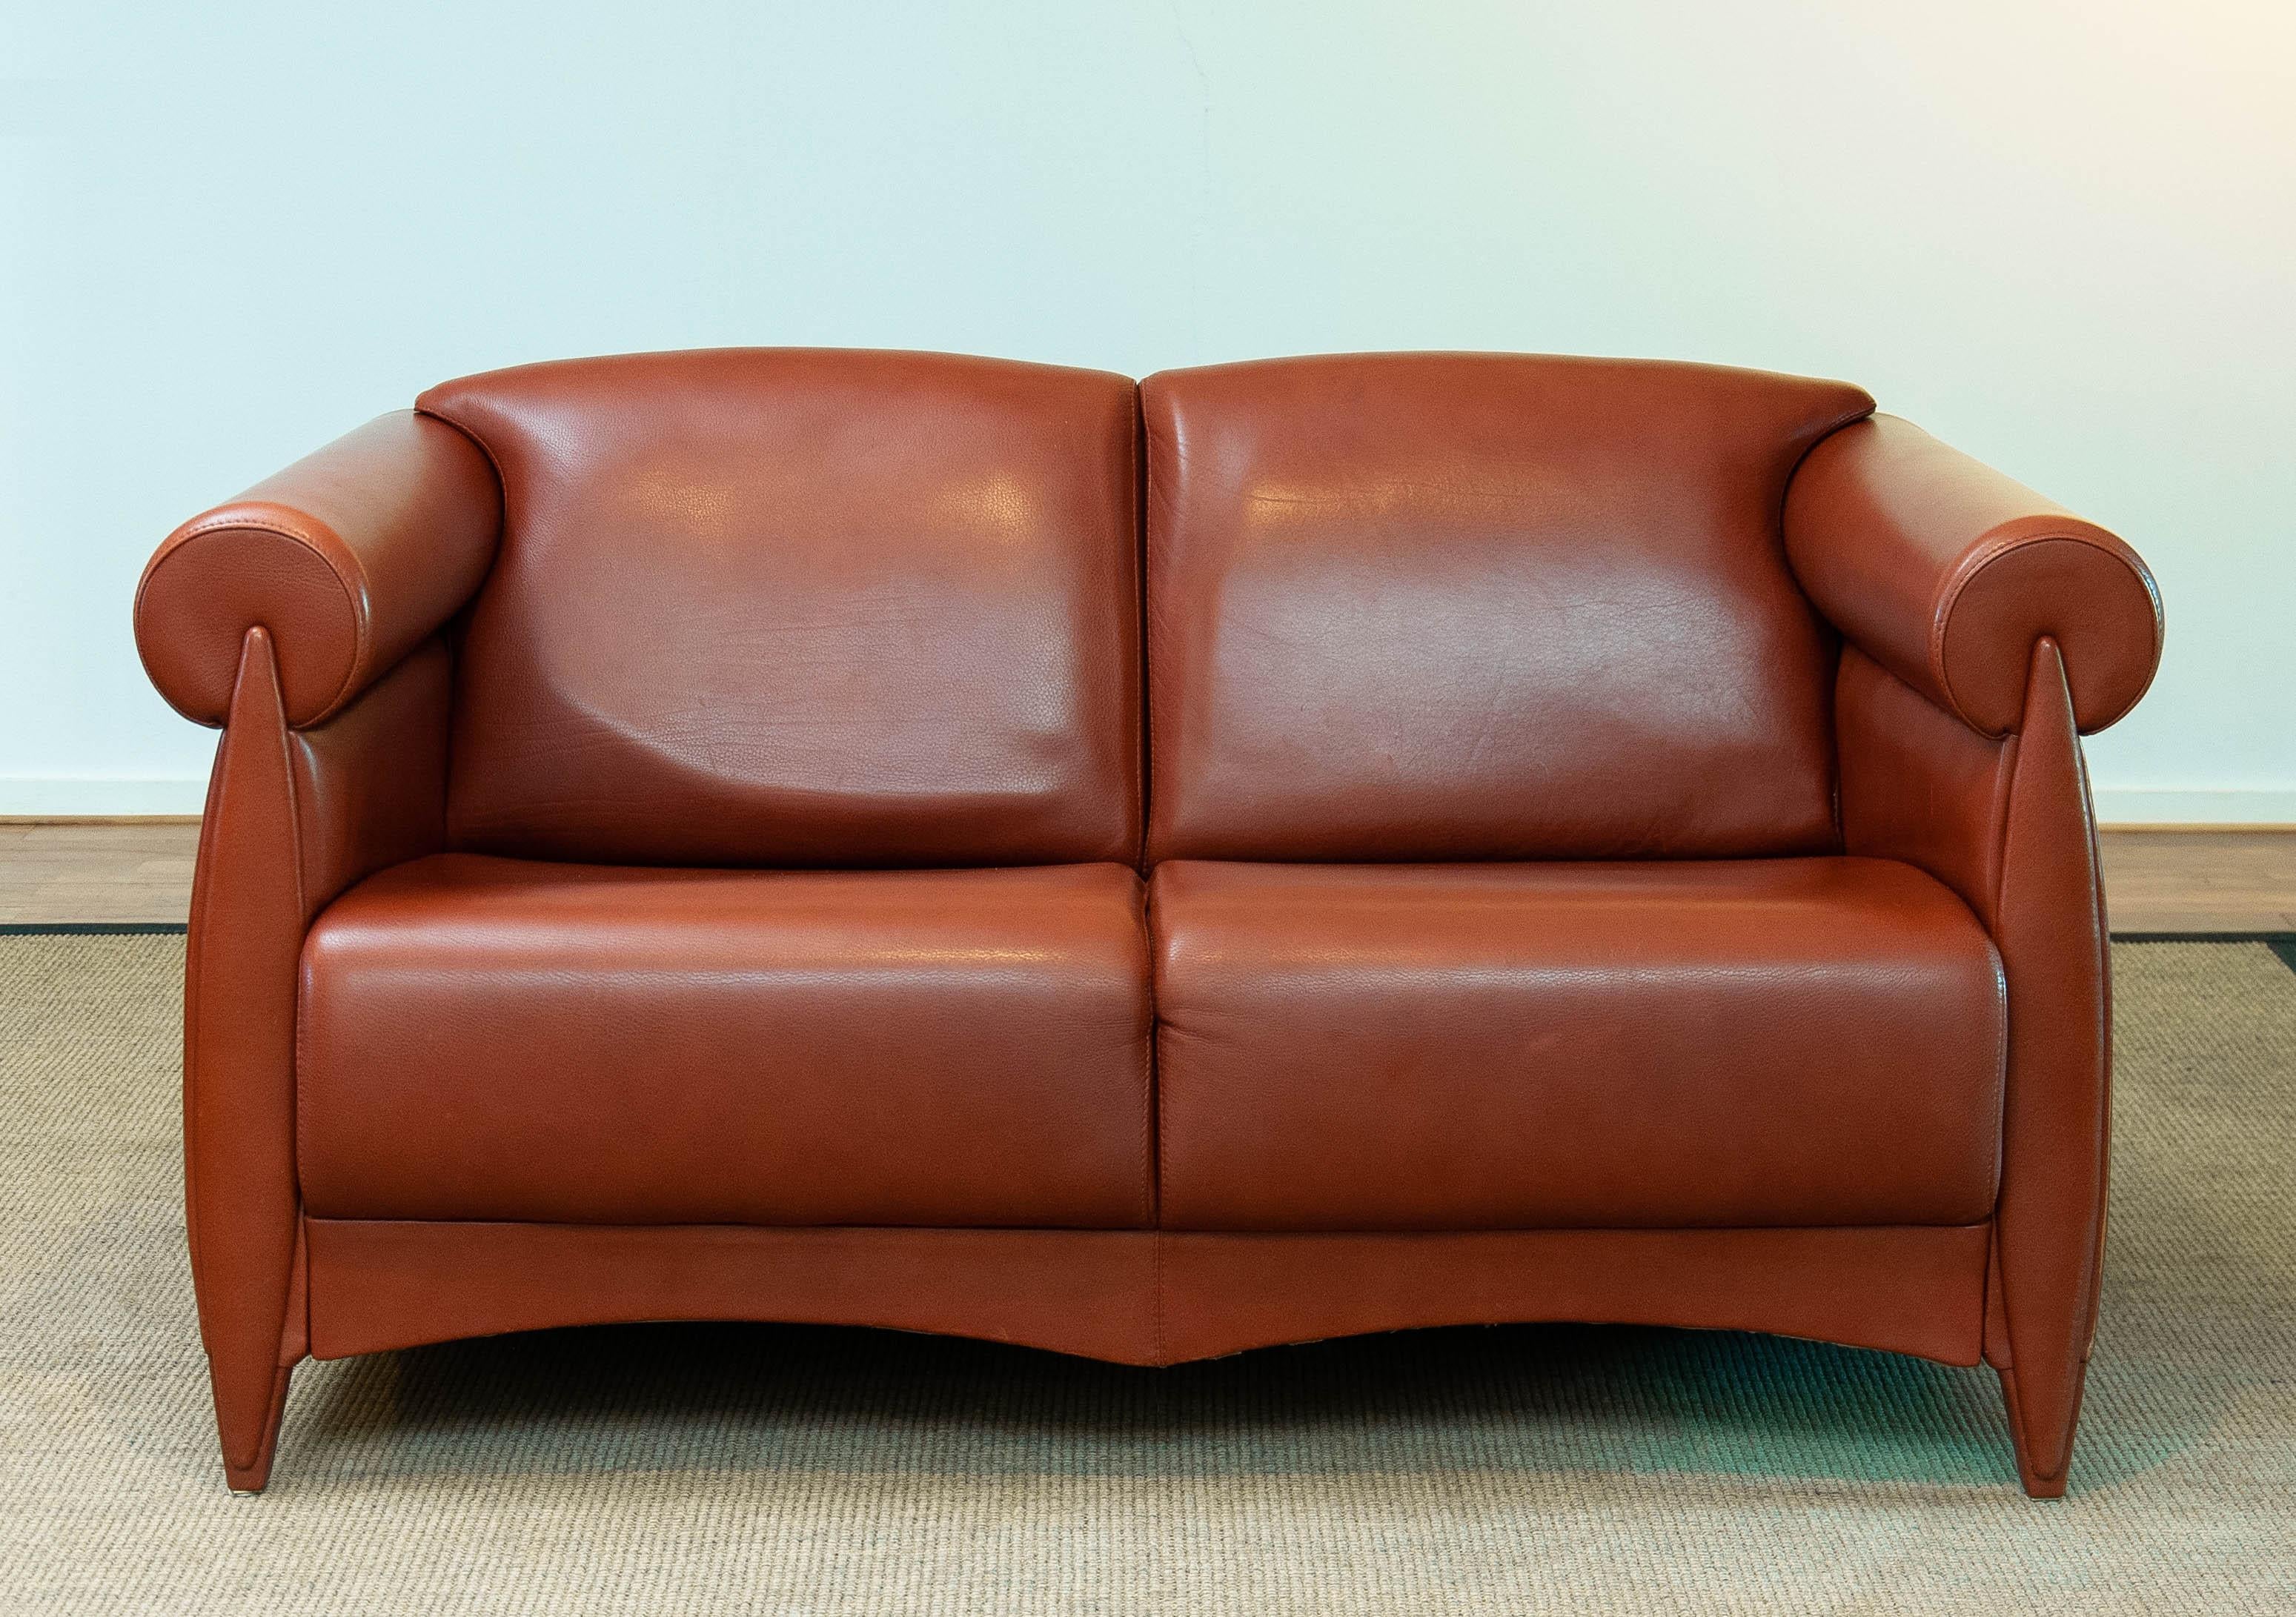 Danish 1980s Modern Two Seater Sofa in Cognac Leather by Klaus Wettergren Denmark For Sale